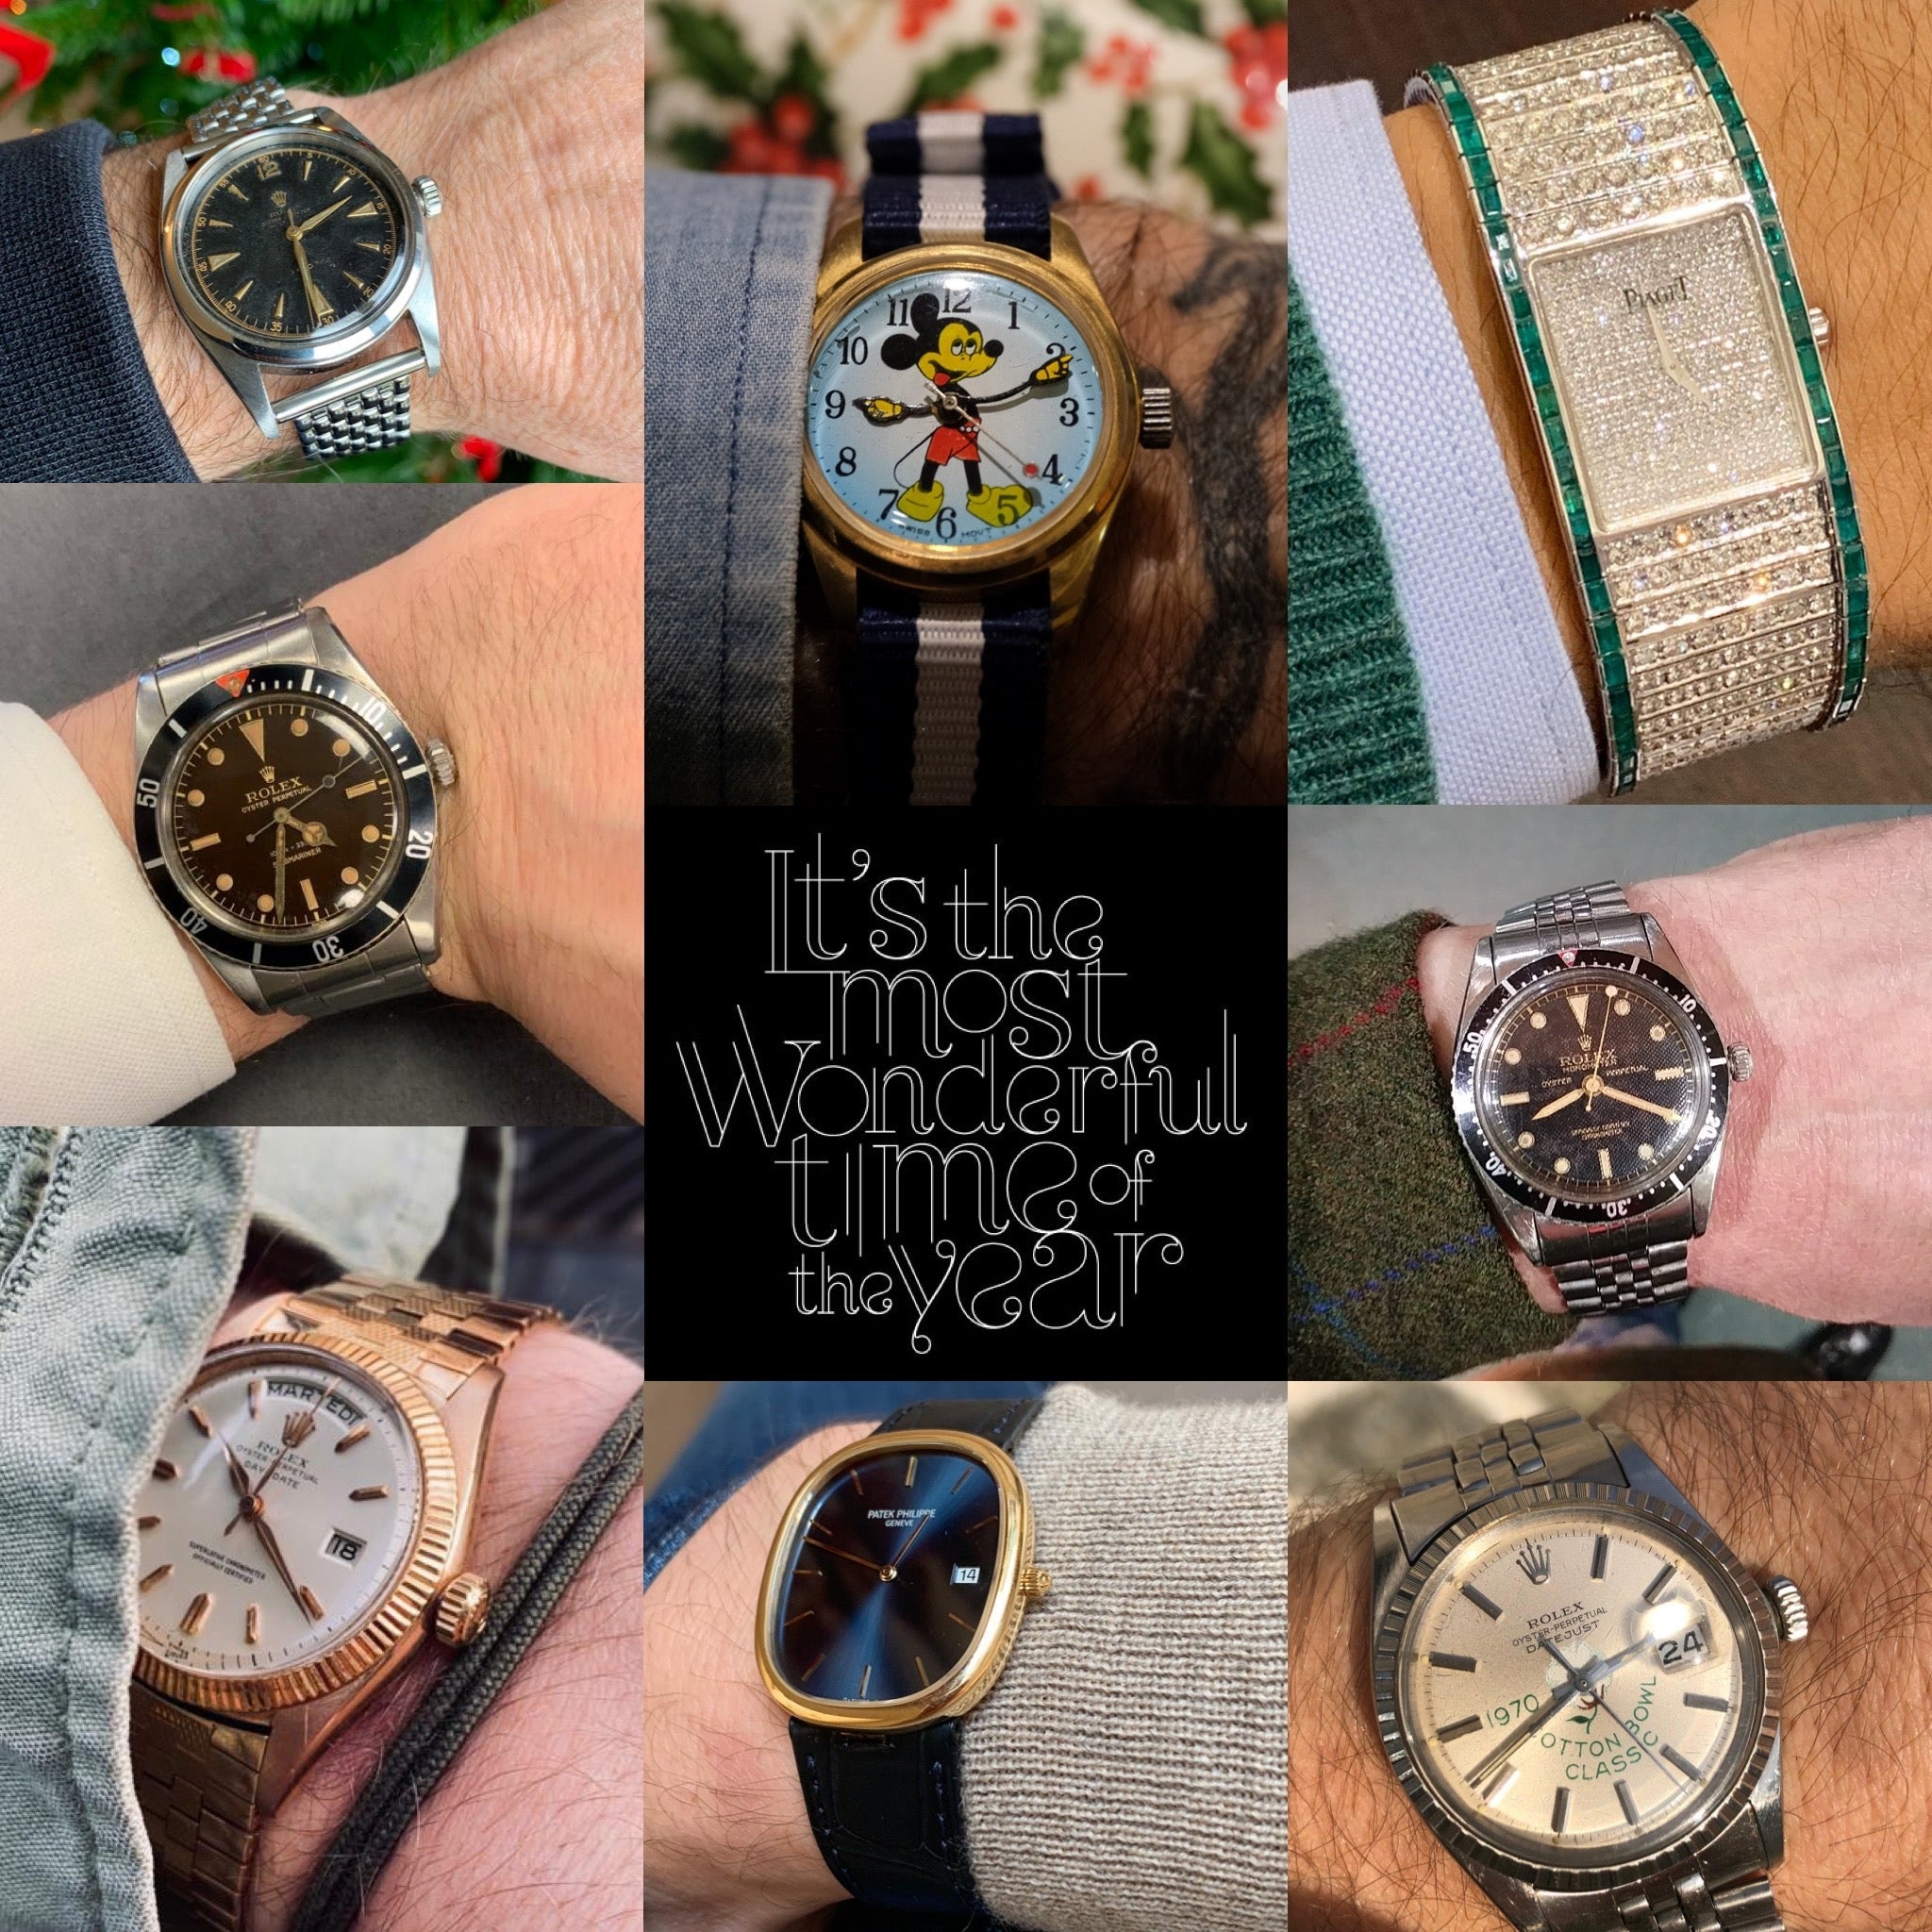 Merry Wristmas from Bulang and Sons